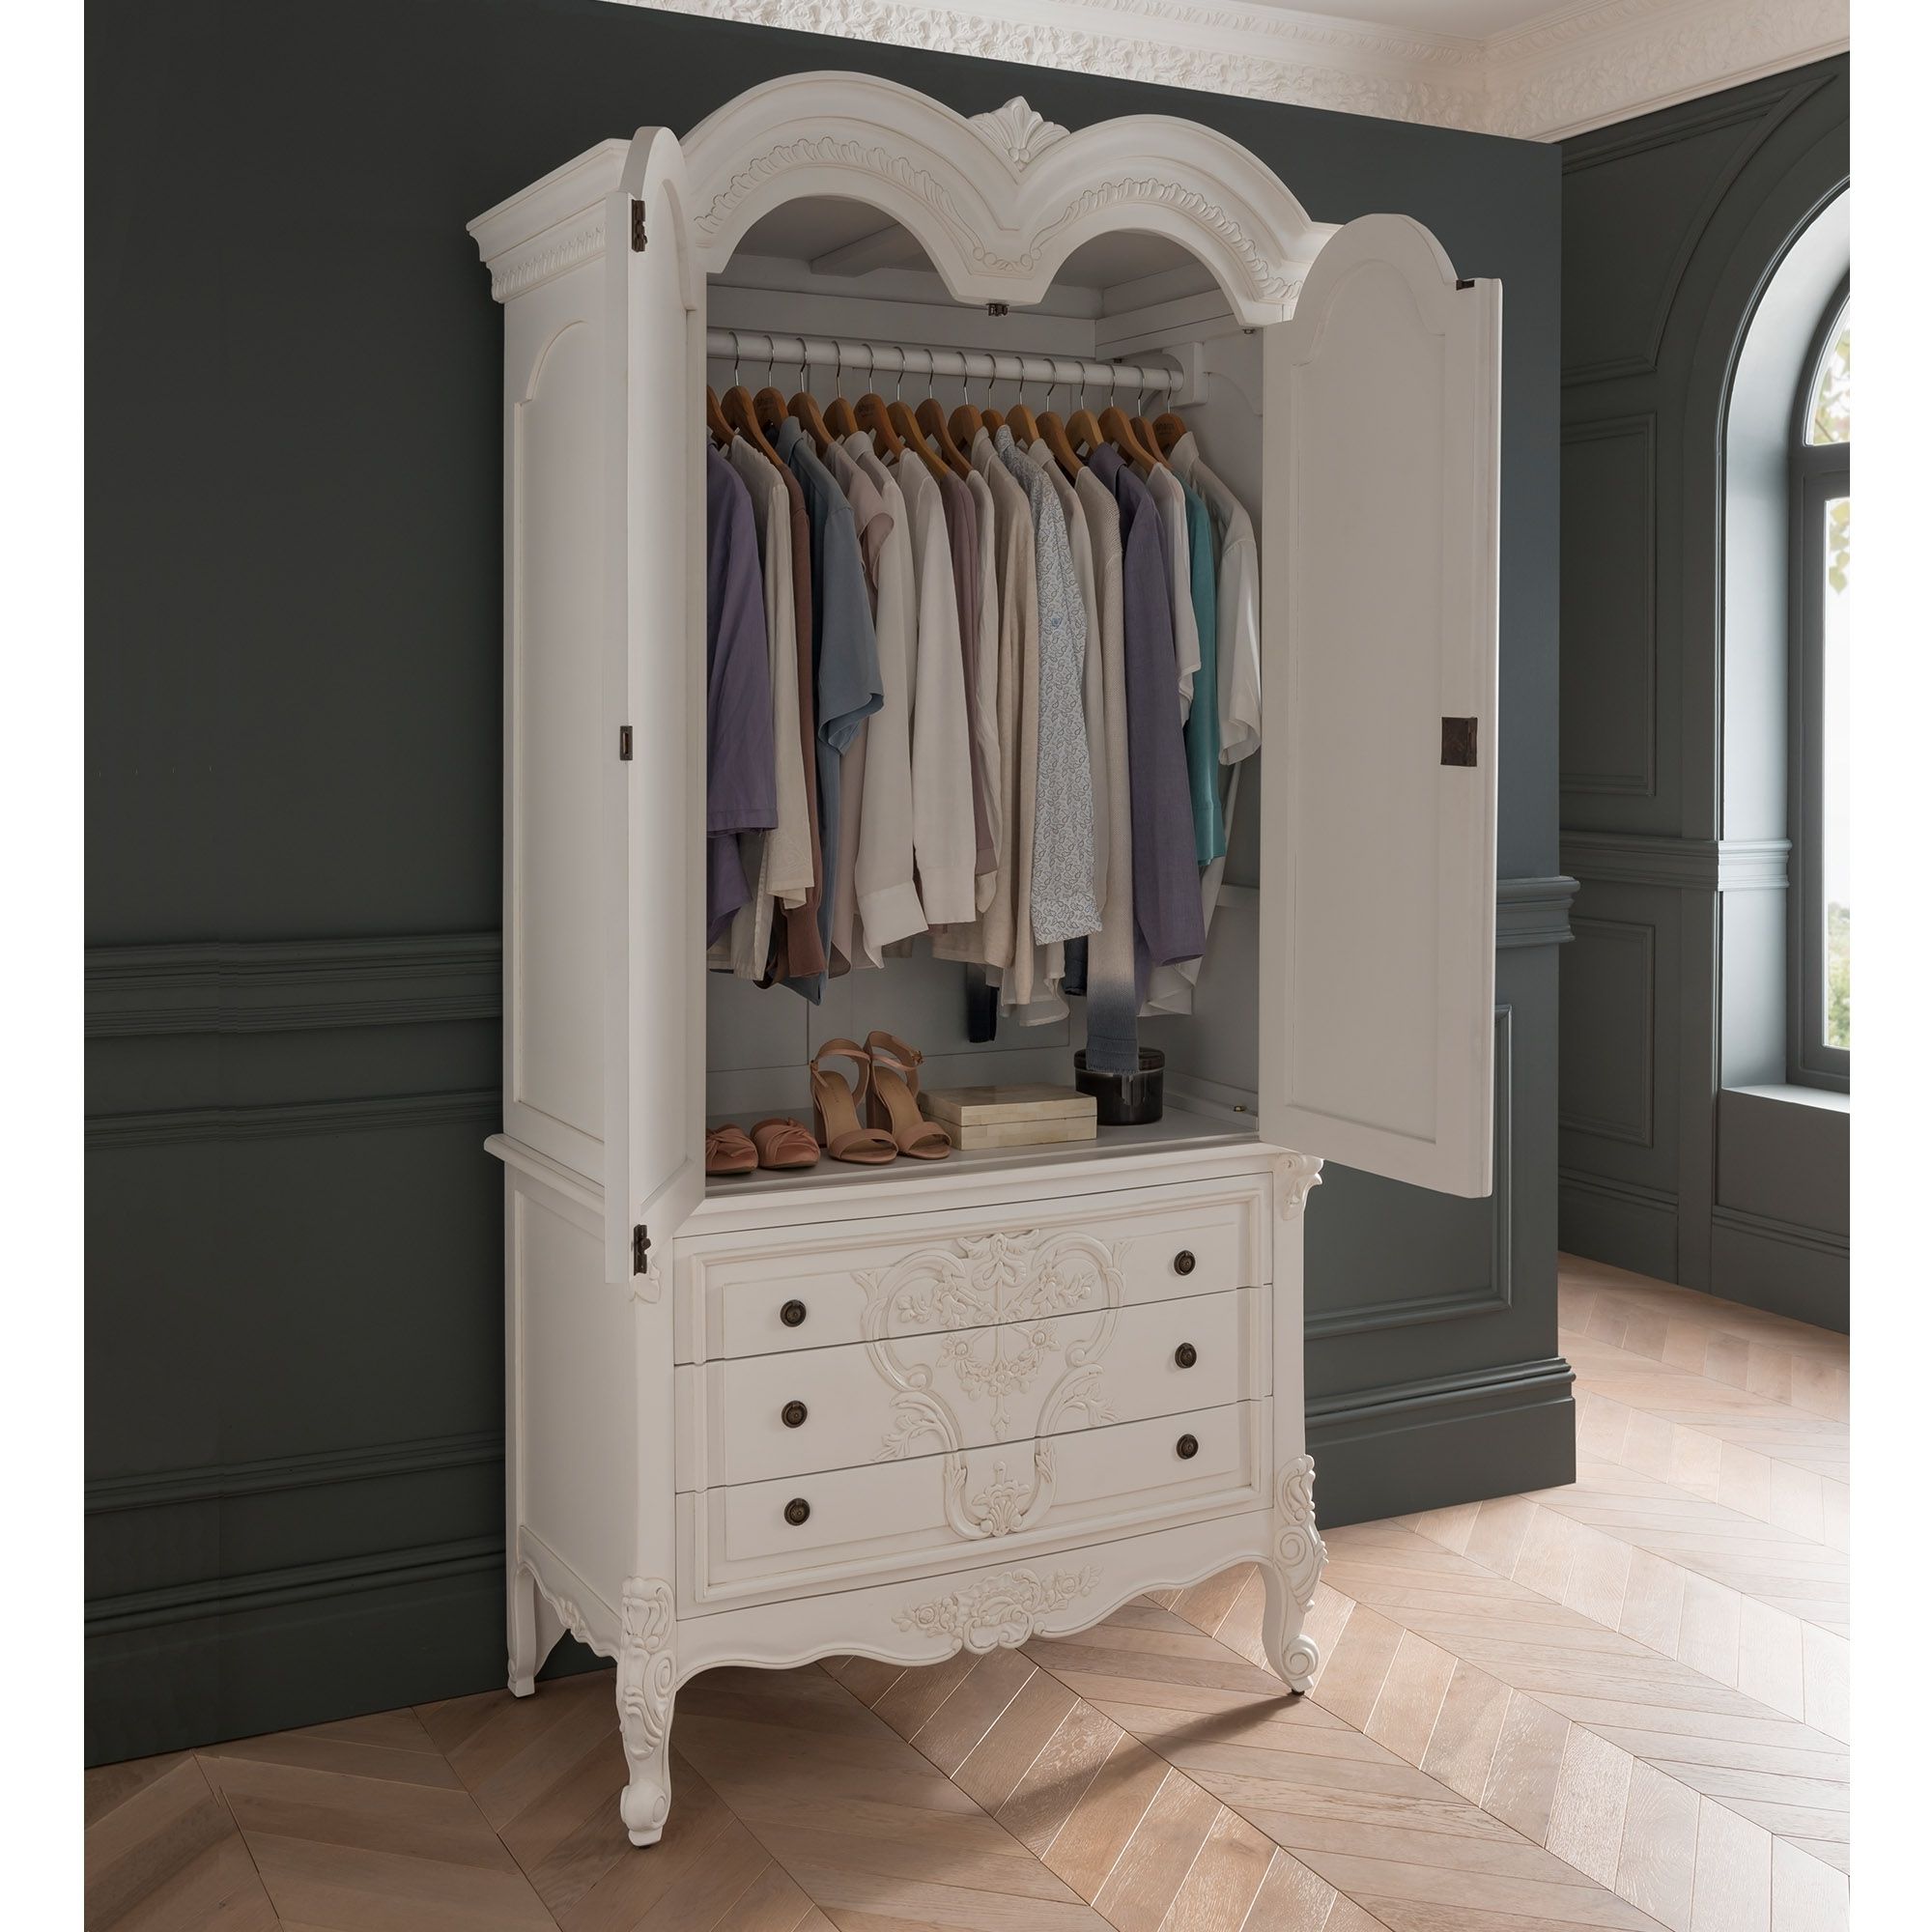 Antique French Style White Finished 1 Drawer Wardrobe | Homesdirect365 Throughout White French Style Wardrobes (View 4 of 20)